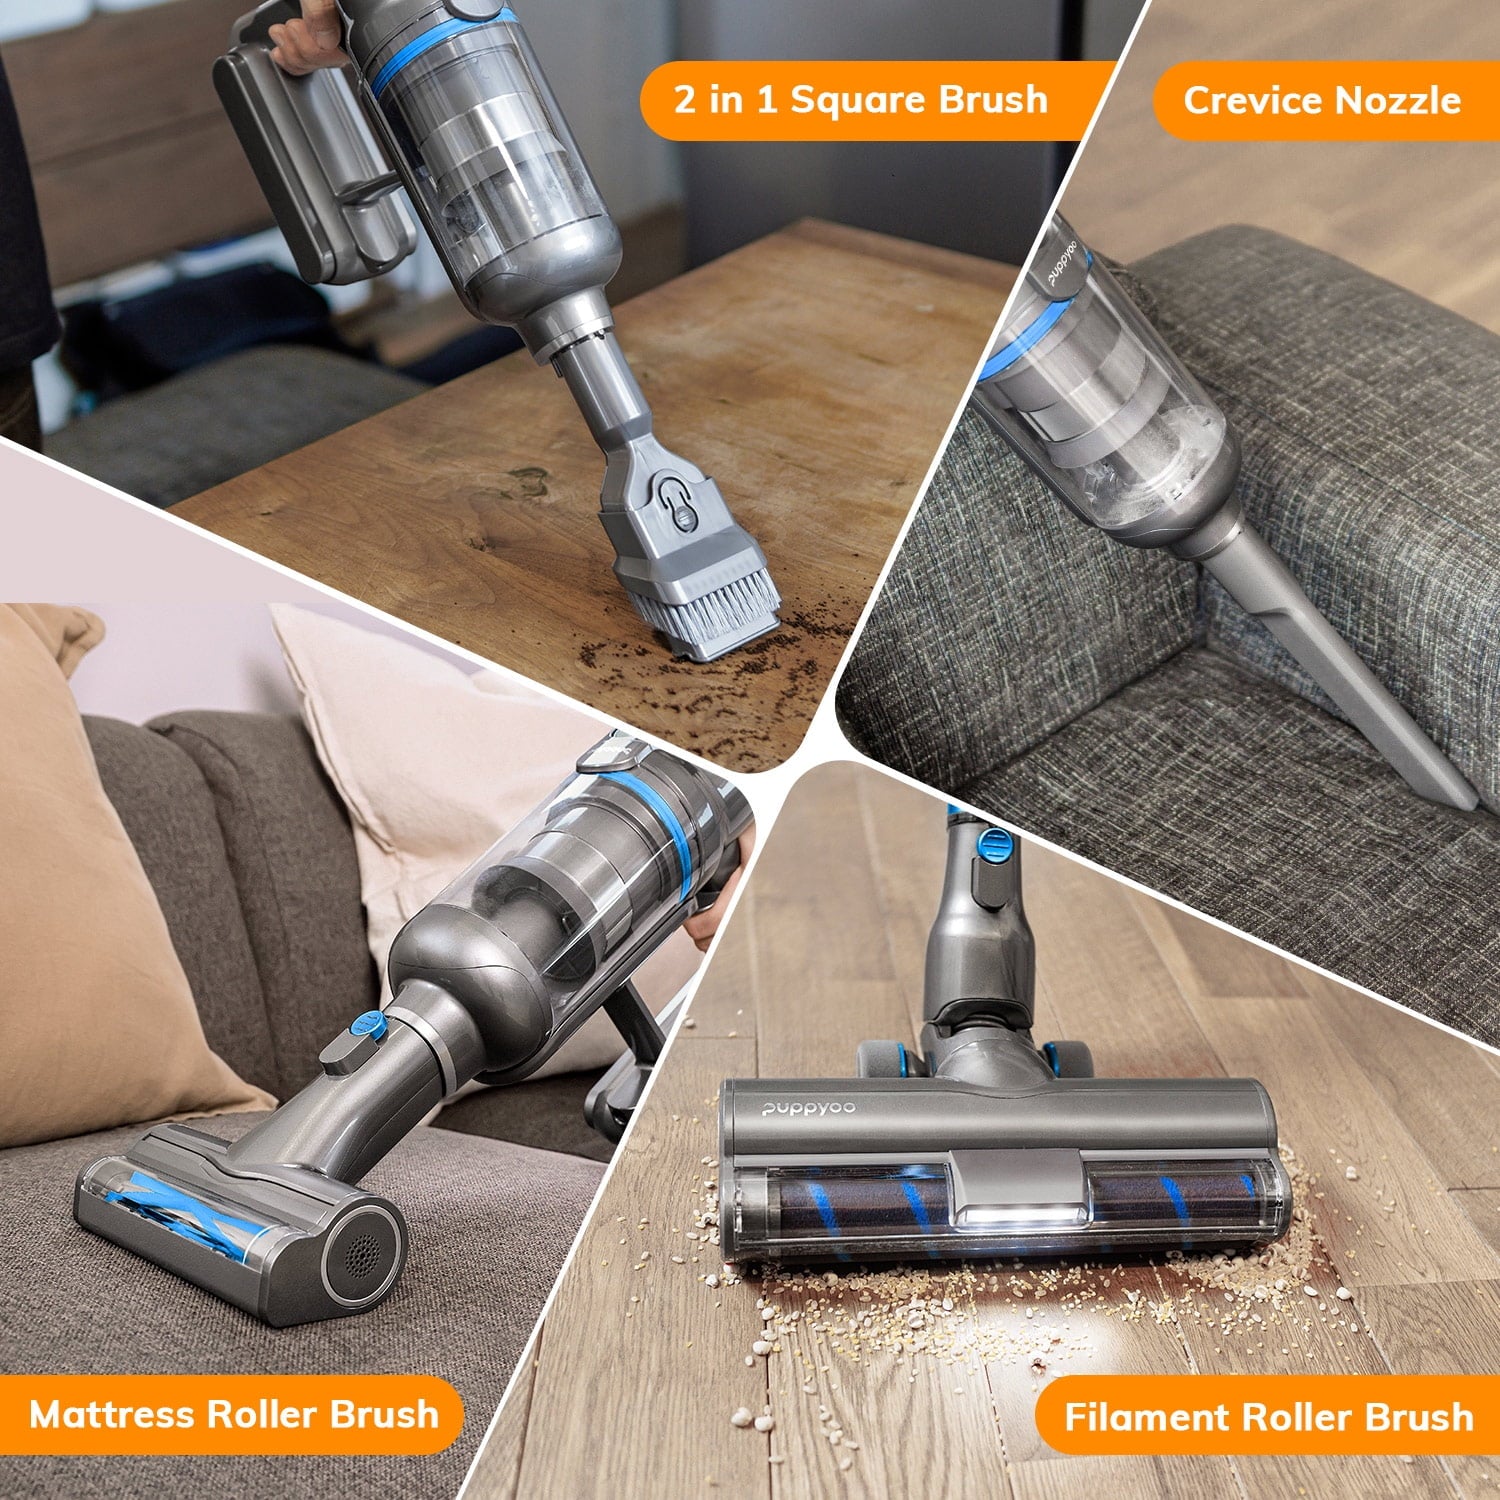 PUPPYOO Cordless Stick Vacuum T12 Pure, 30 Kpa Suction 60 Minutes for Multiple Floor Types